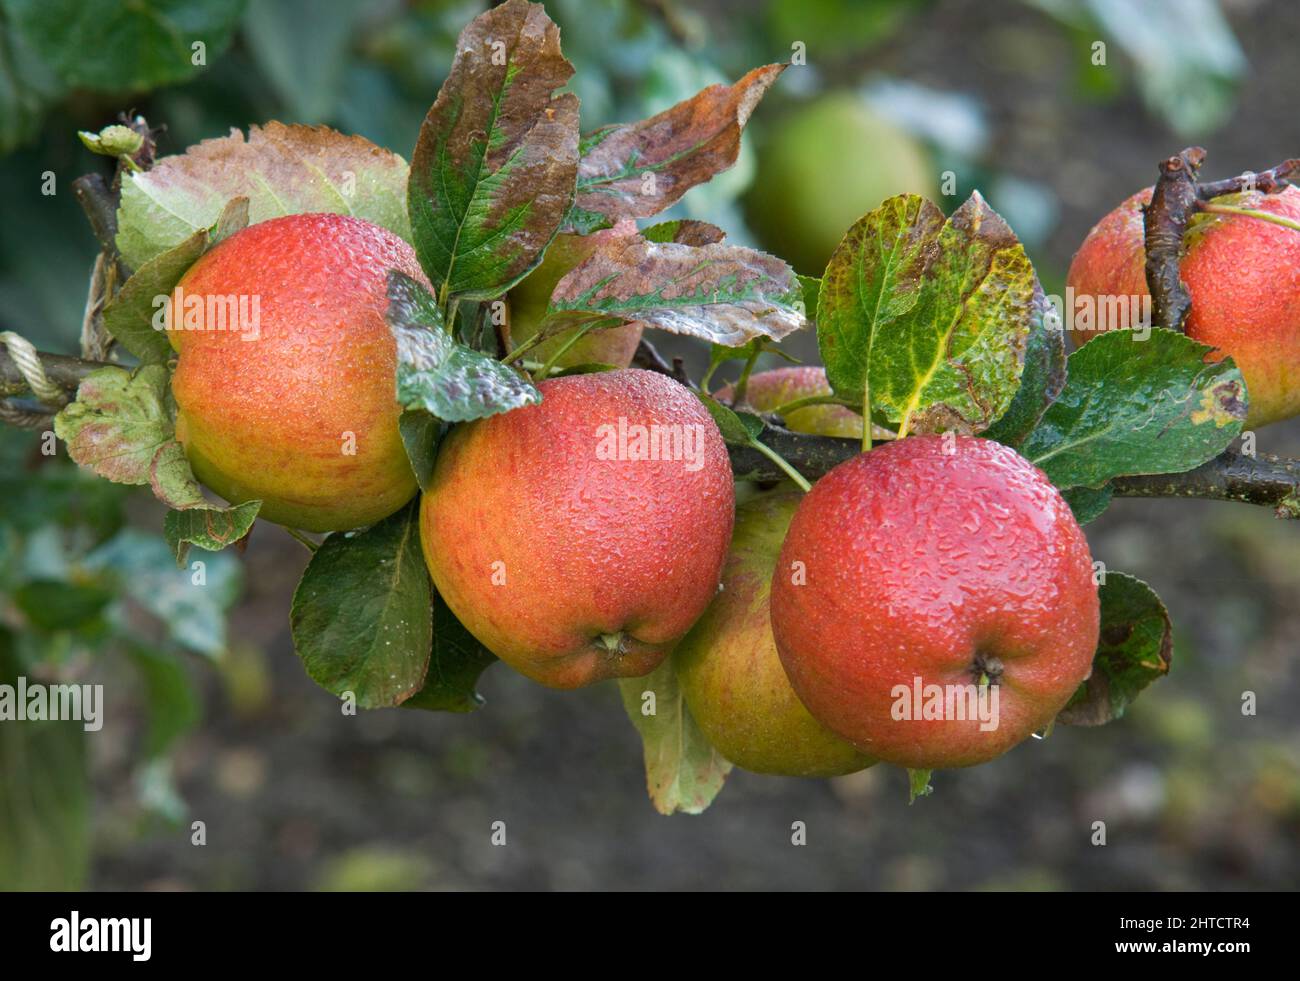 Audley End, Audley Park, Saffron Walden, Uttlesford, Essex, 2008. Detail of Lord Burghley dessert apples on a tree on the estate. Stock Photo